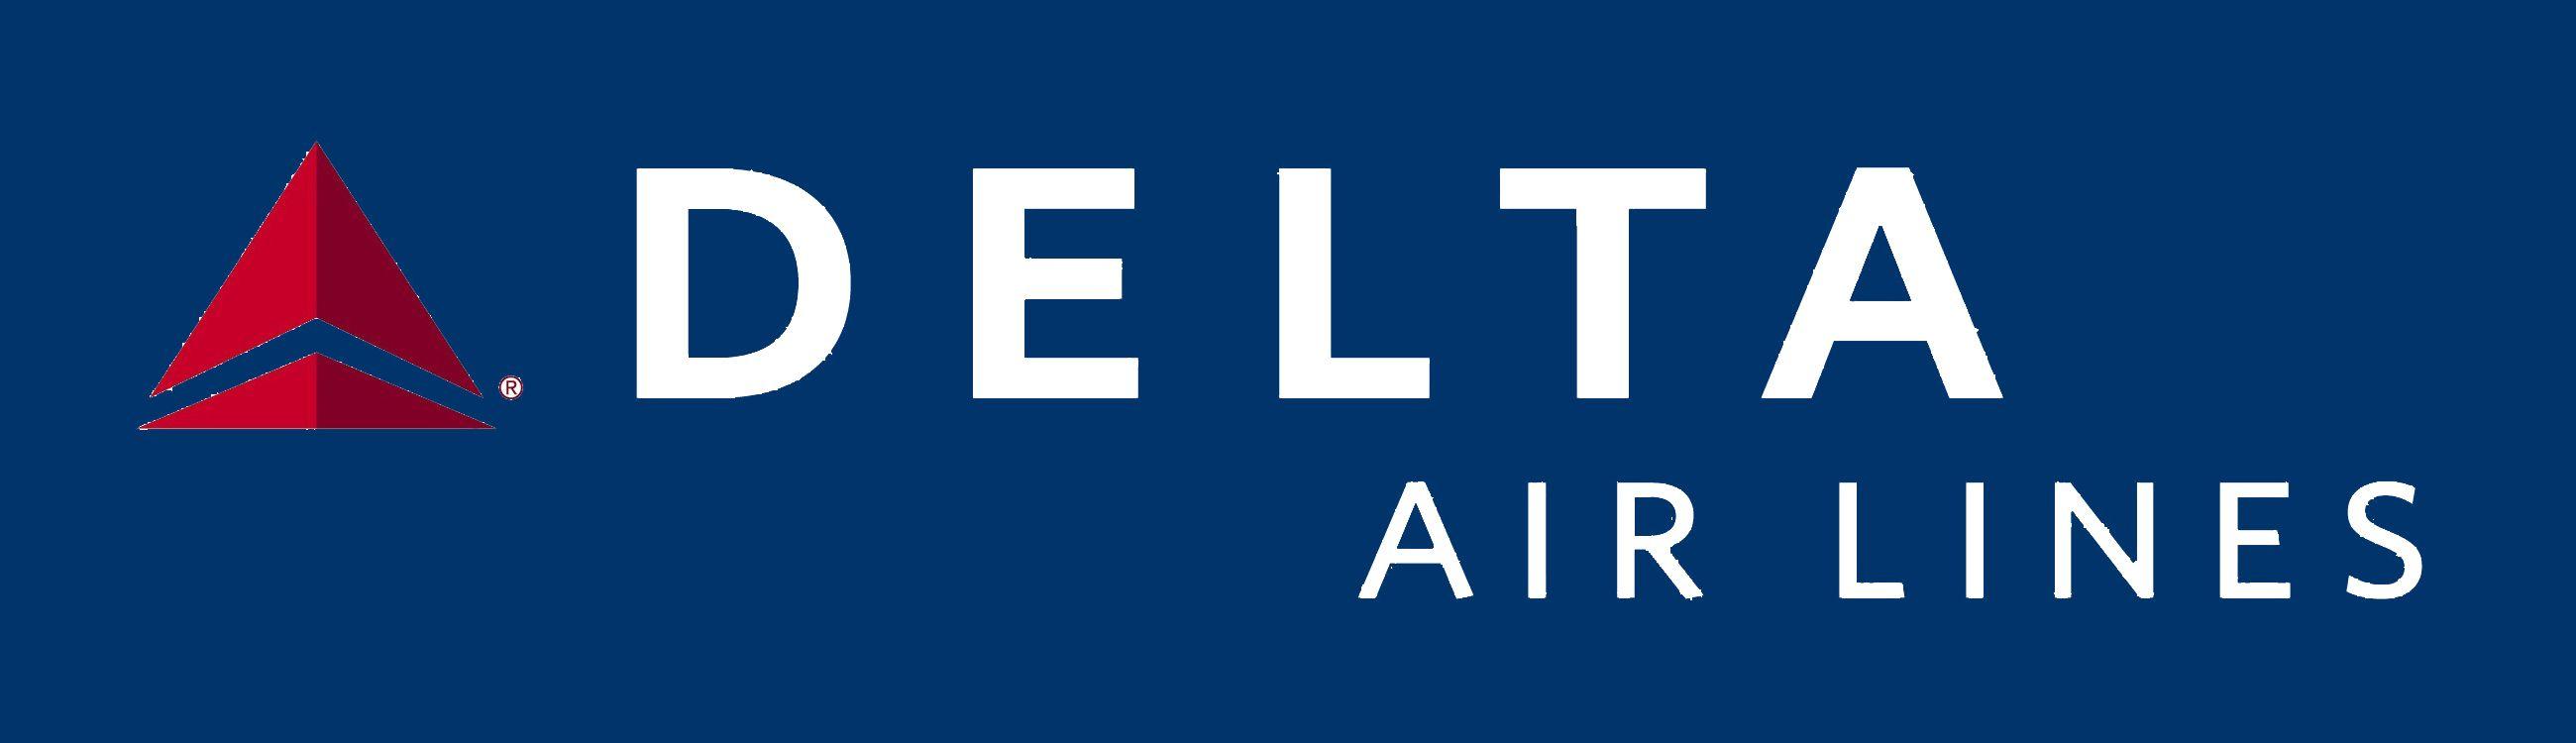 Delta Airlines Logo - Delta Air Lines, Inc. | $DAL Stock | Shares Surge As Carrier Posts ...